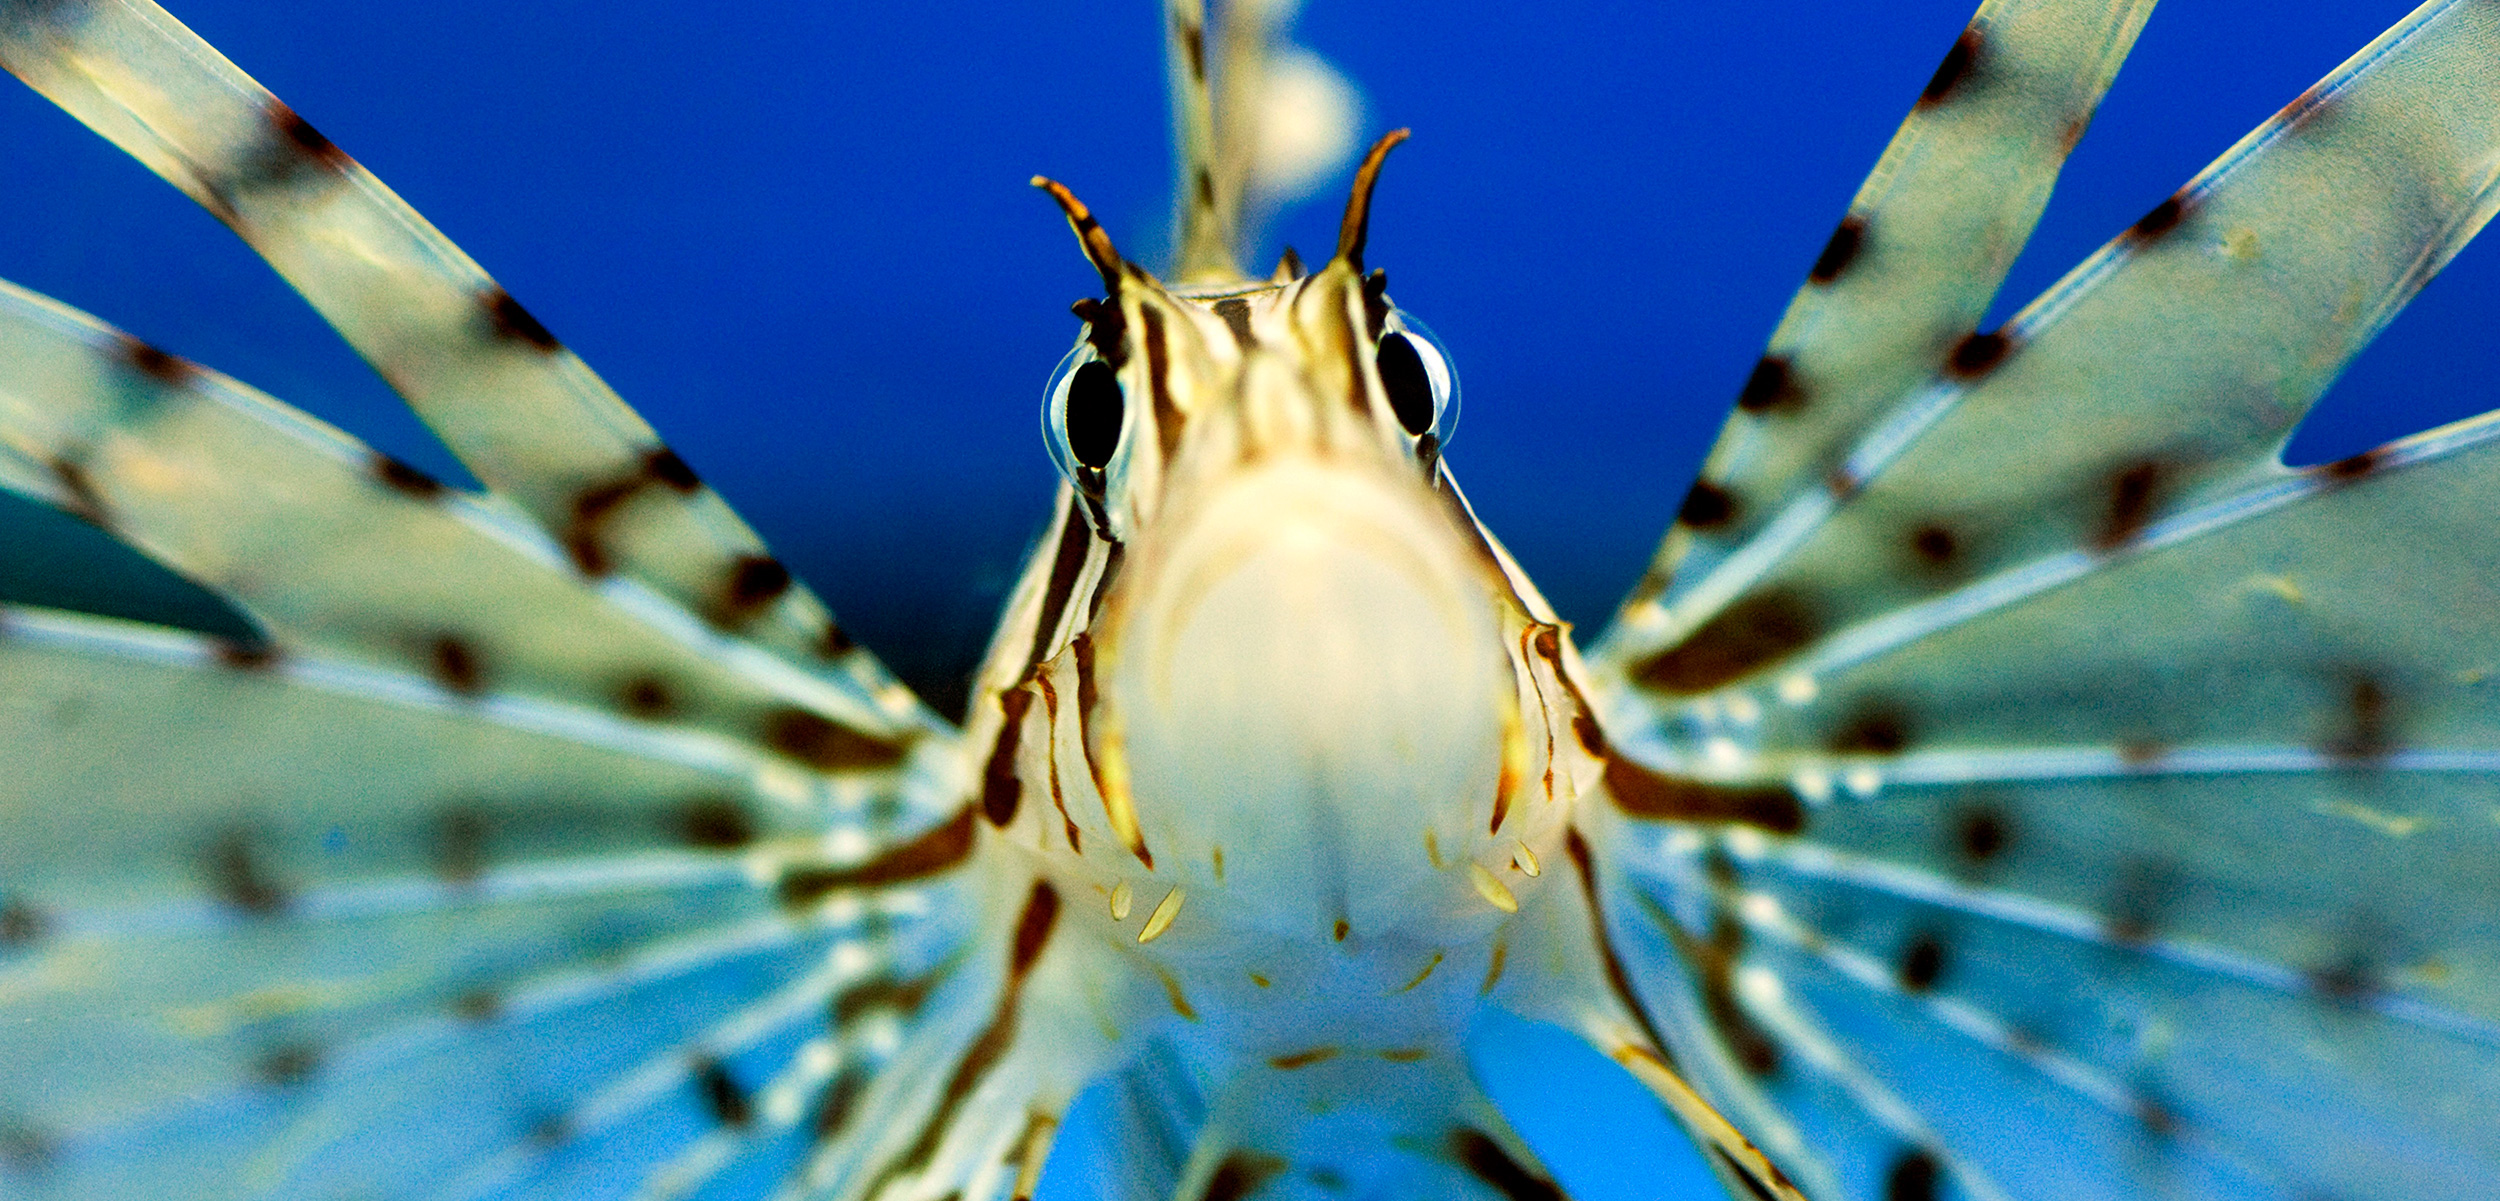 Invasive lionfish, native to the Indo-Pacific, are threatening Caribbean coral reefs. Photo by Liz Marchiondo/Visuals Unlimited/Corbis